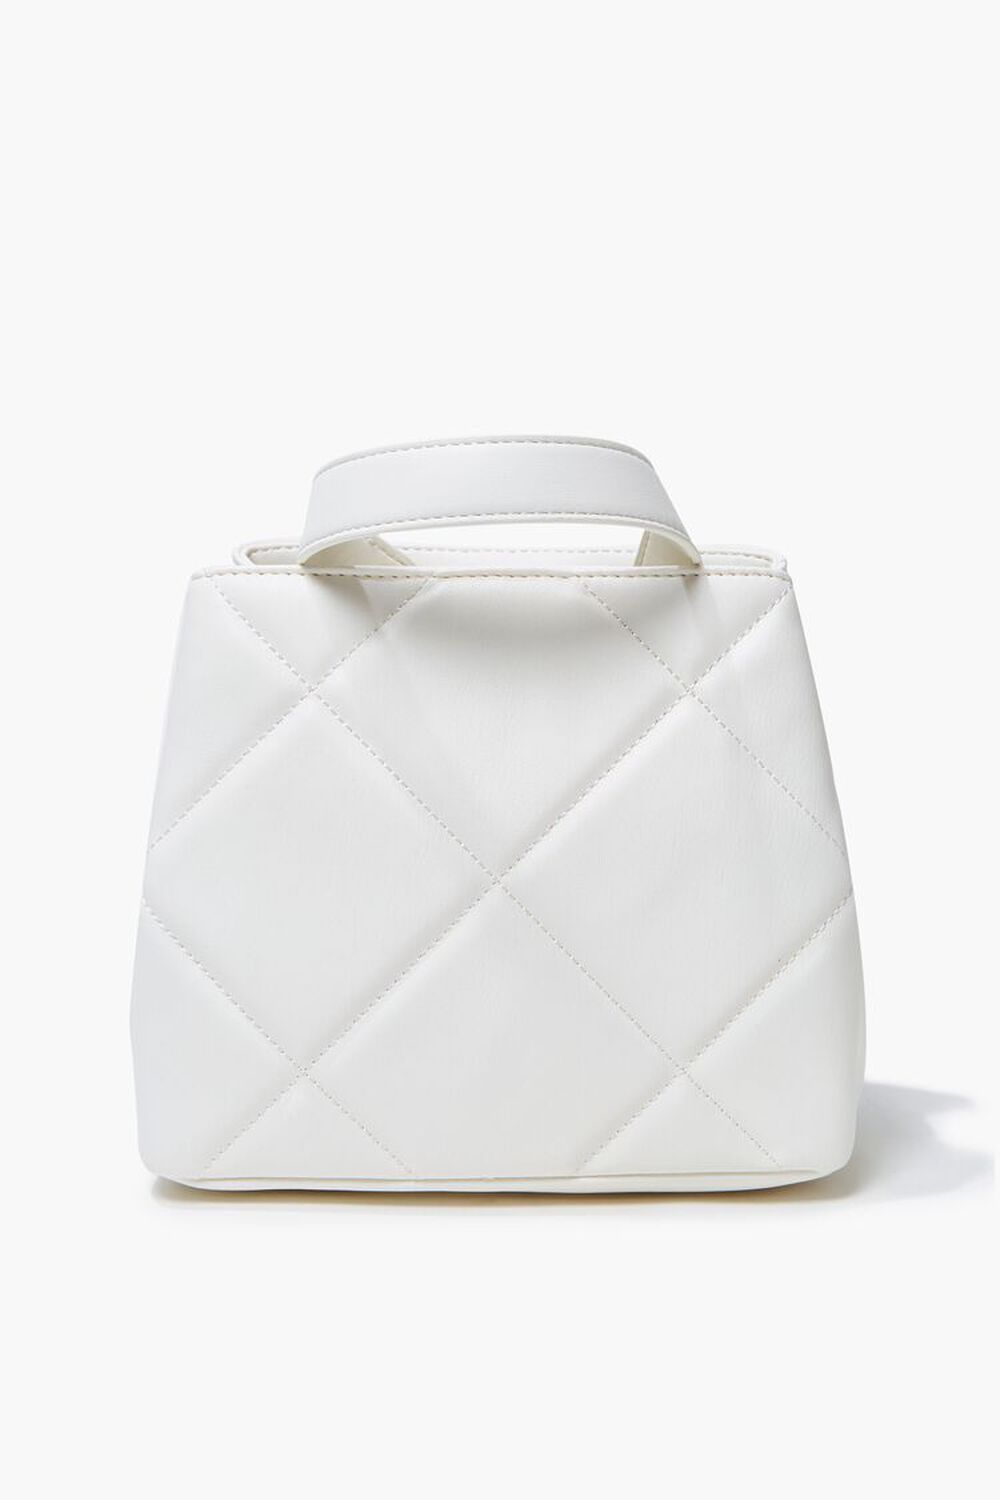 WHITE Studded Quilted Satchel, image 3